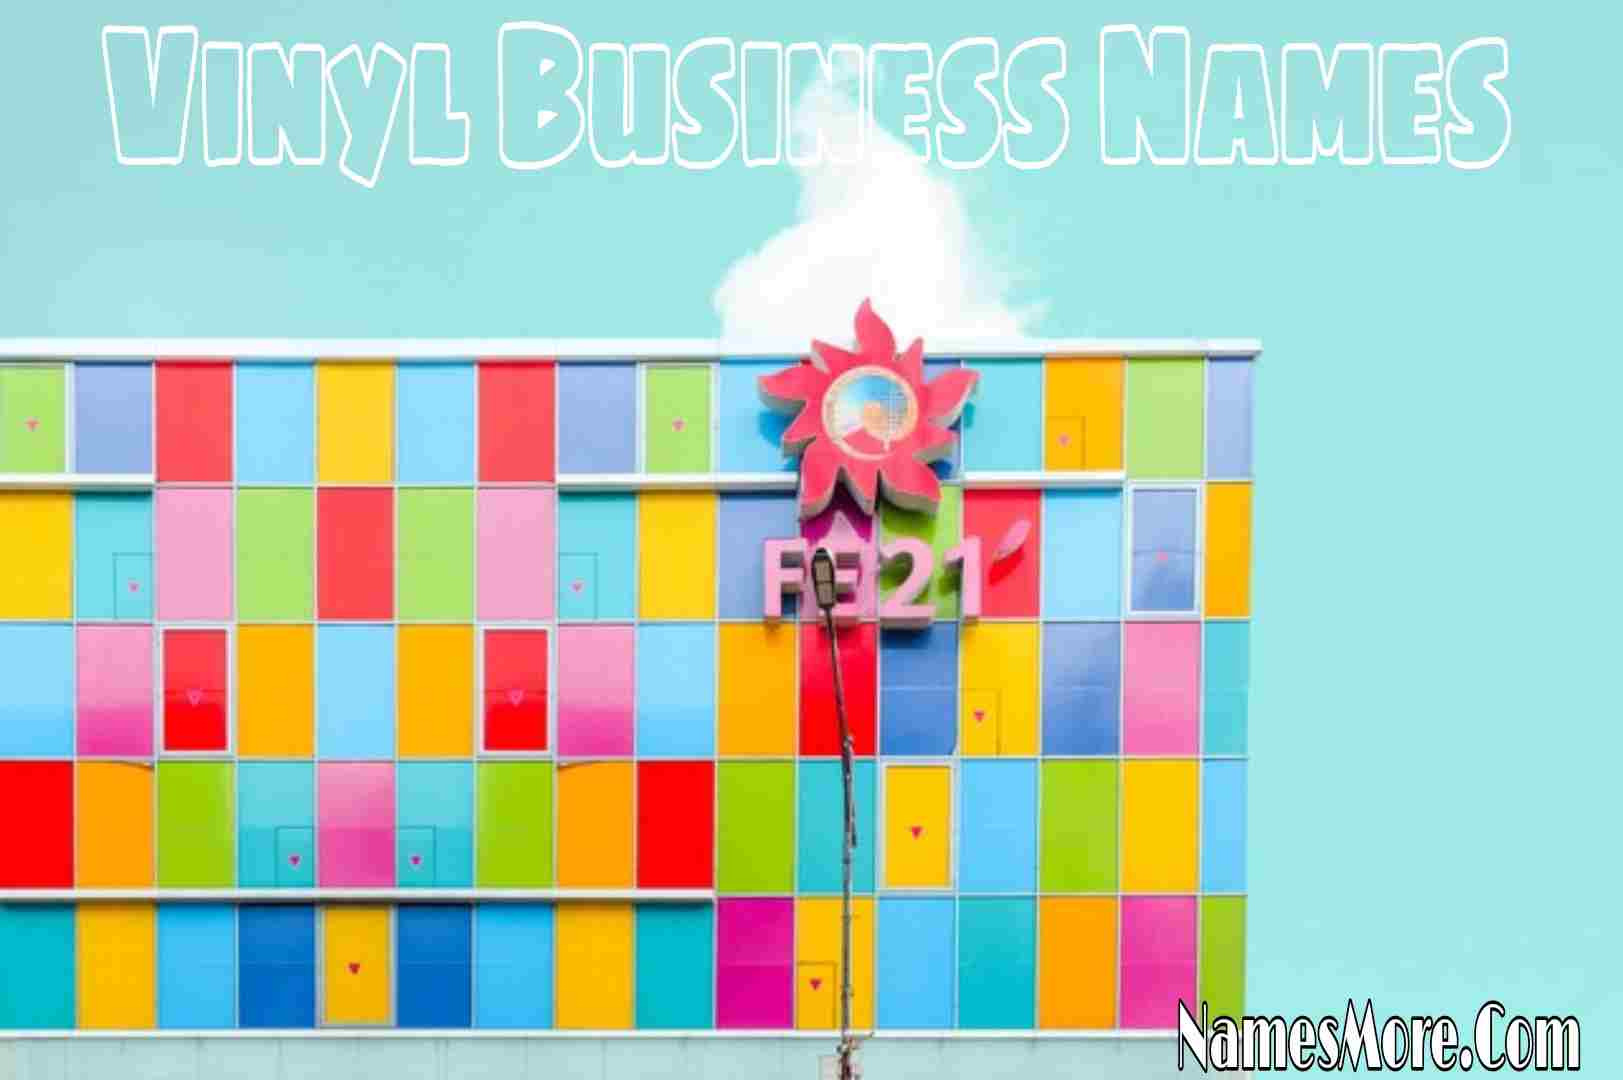 Featured Image for 870+ Vinyl Business Names [Best Ideas]